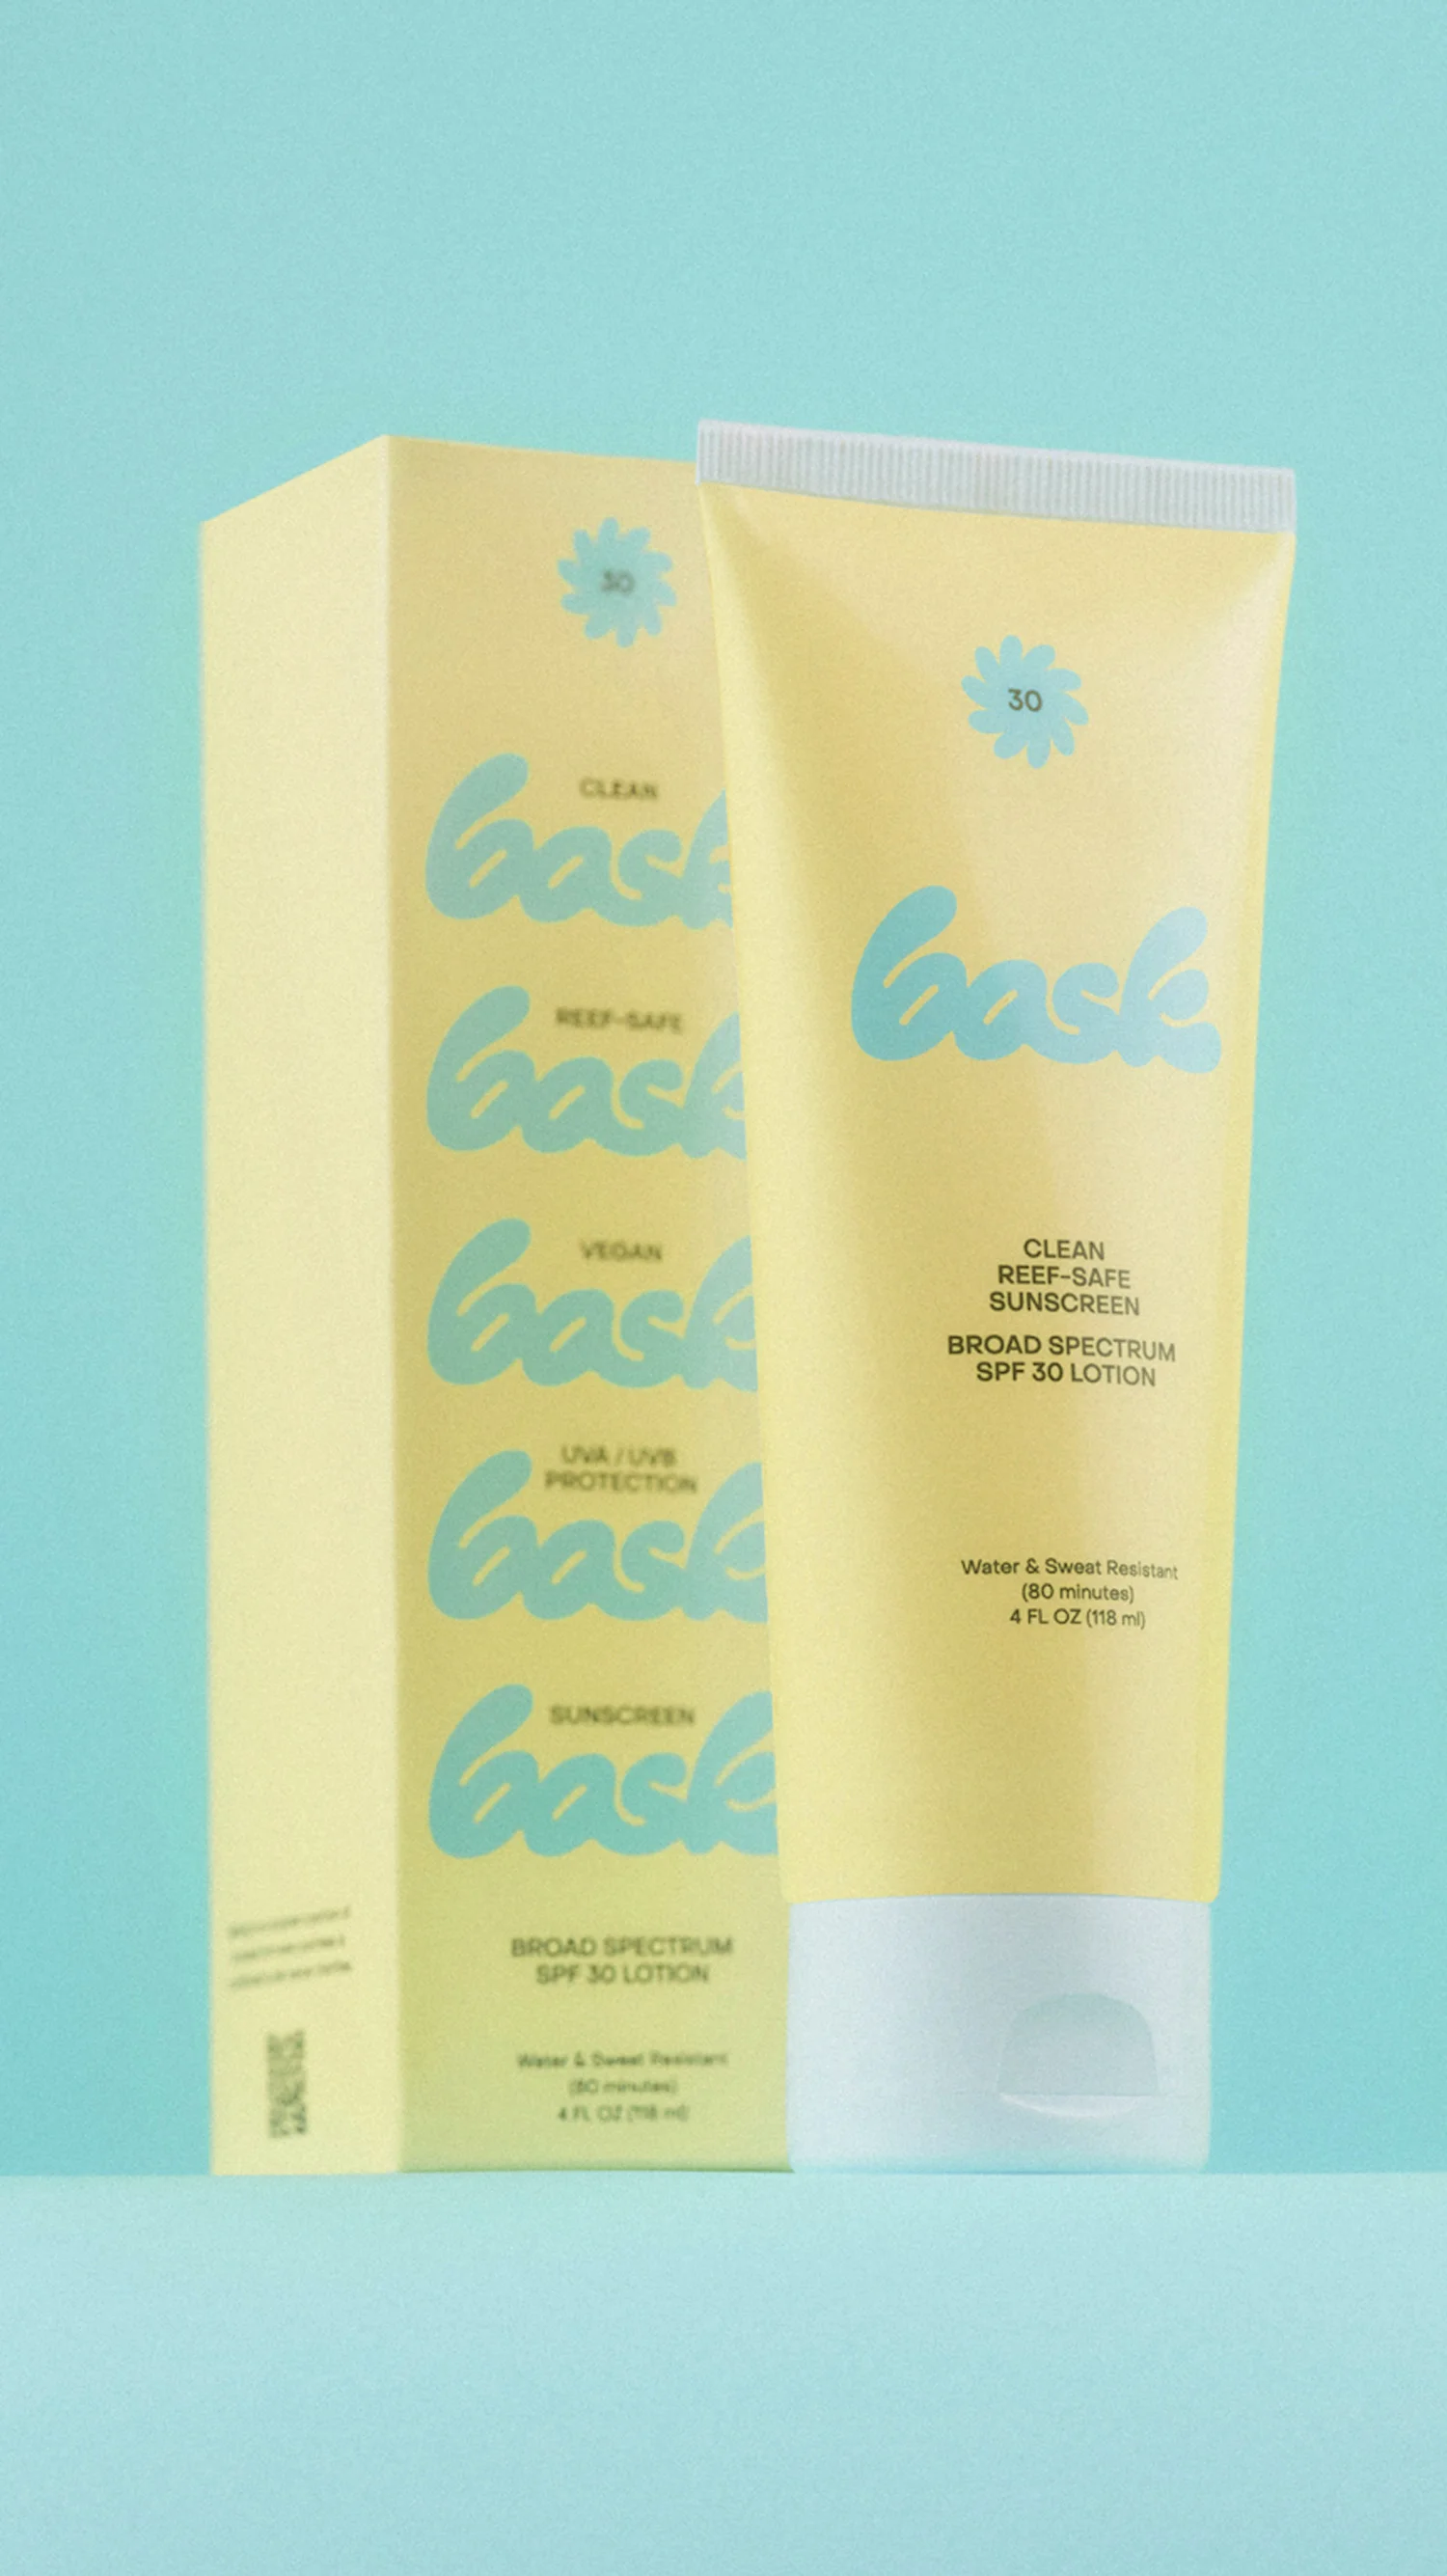 Bask Sunscreen Yellow Lotion Tube on Blue Background by RoAndCo